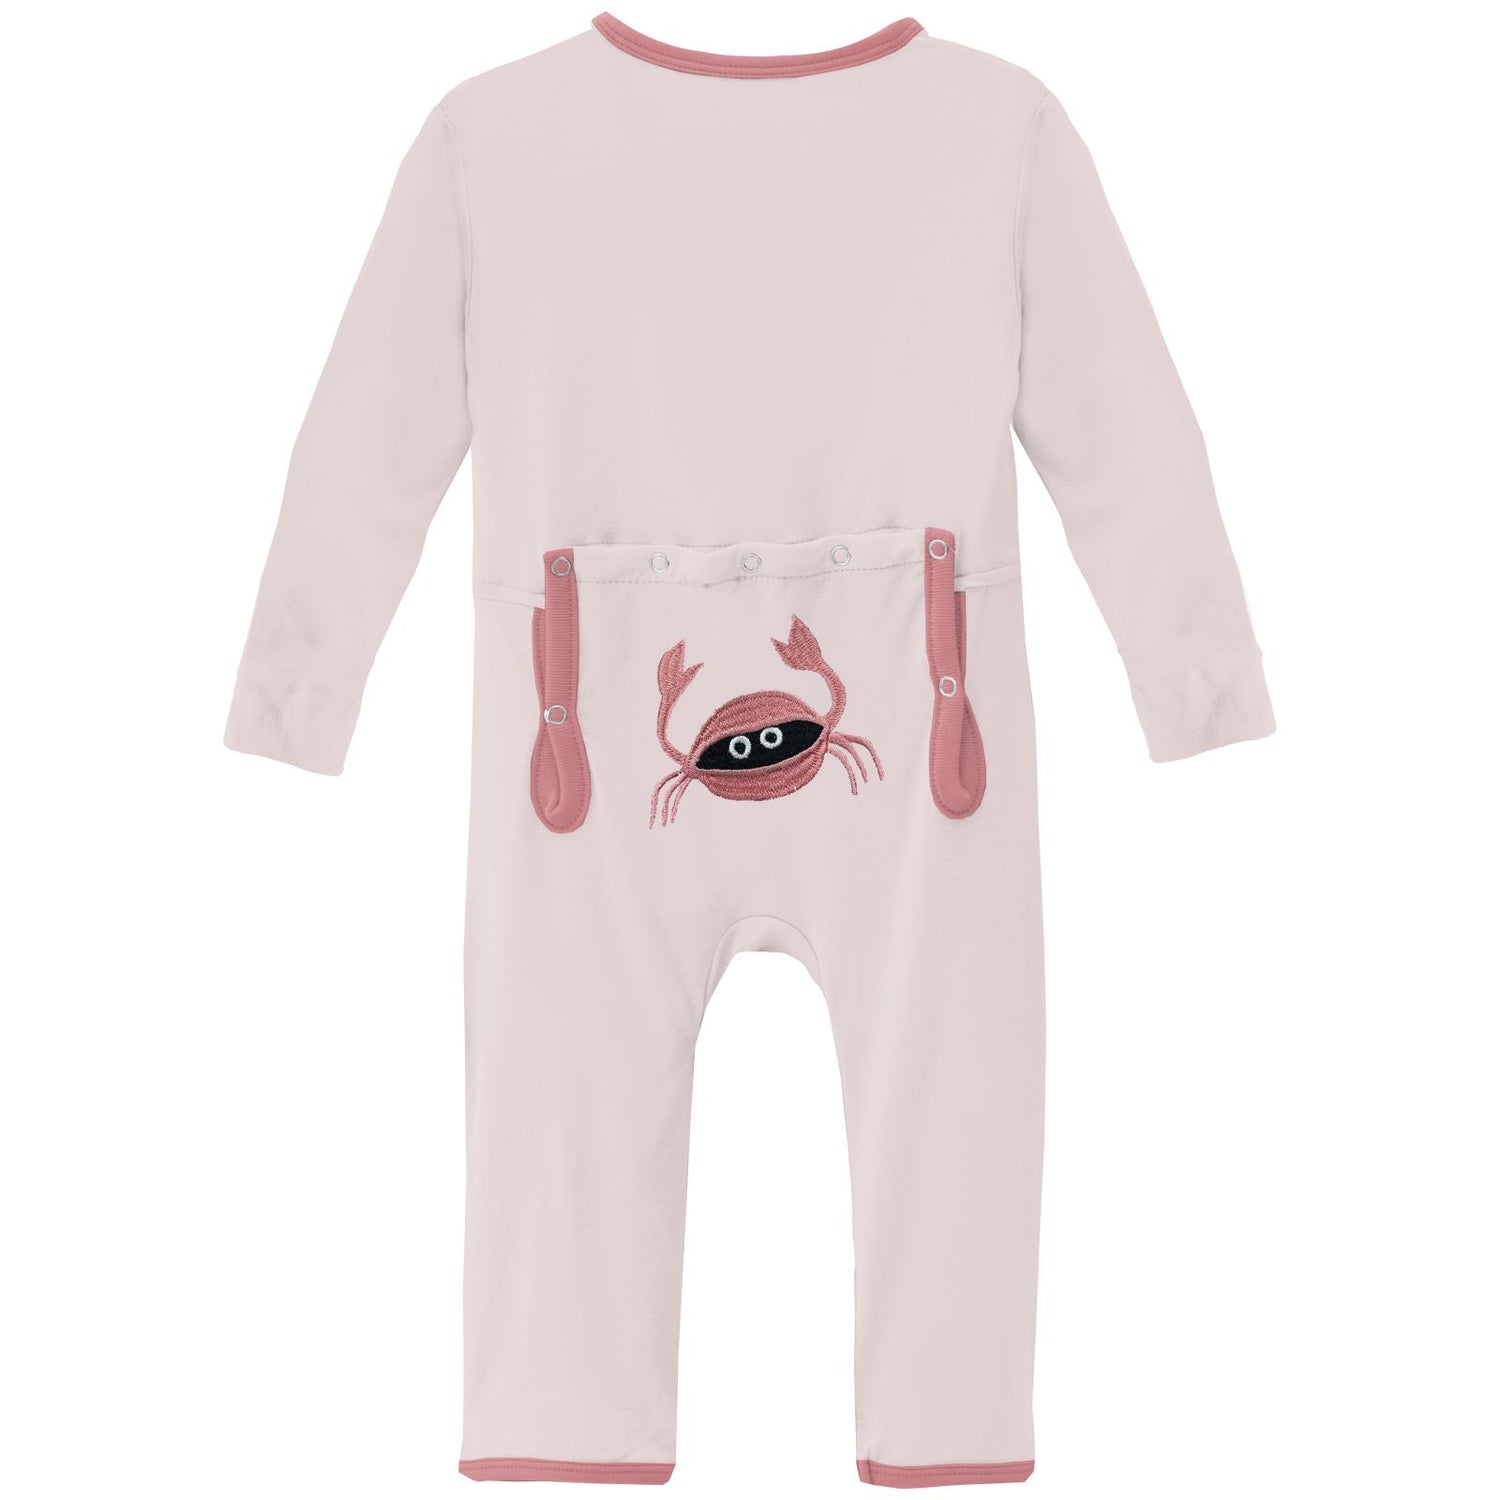 Applique Coverall with Zipper in Macaroon Crabs